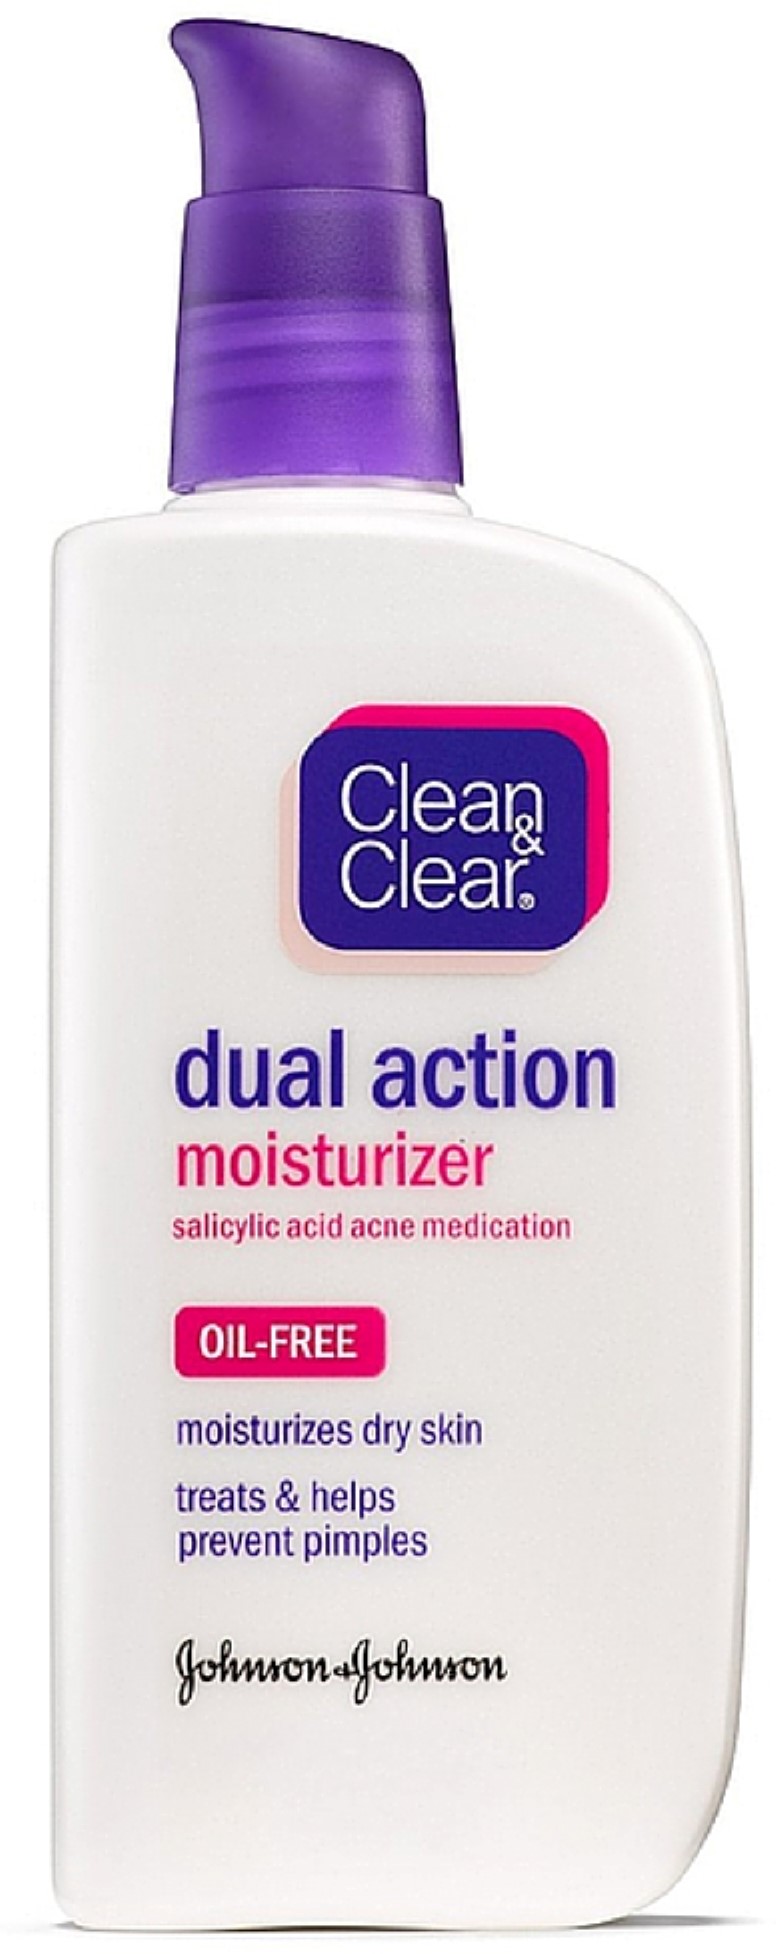 CLEAN & CLEAR Dual Action Oil-Free Moisturizer 4 oz (Pack of 2) - image 1 of 1